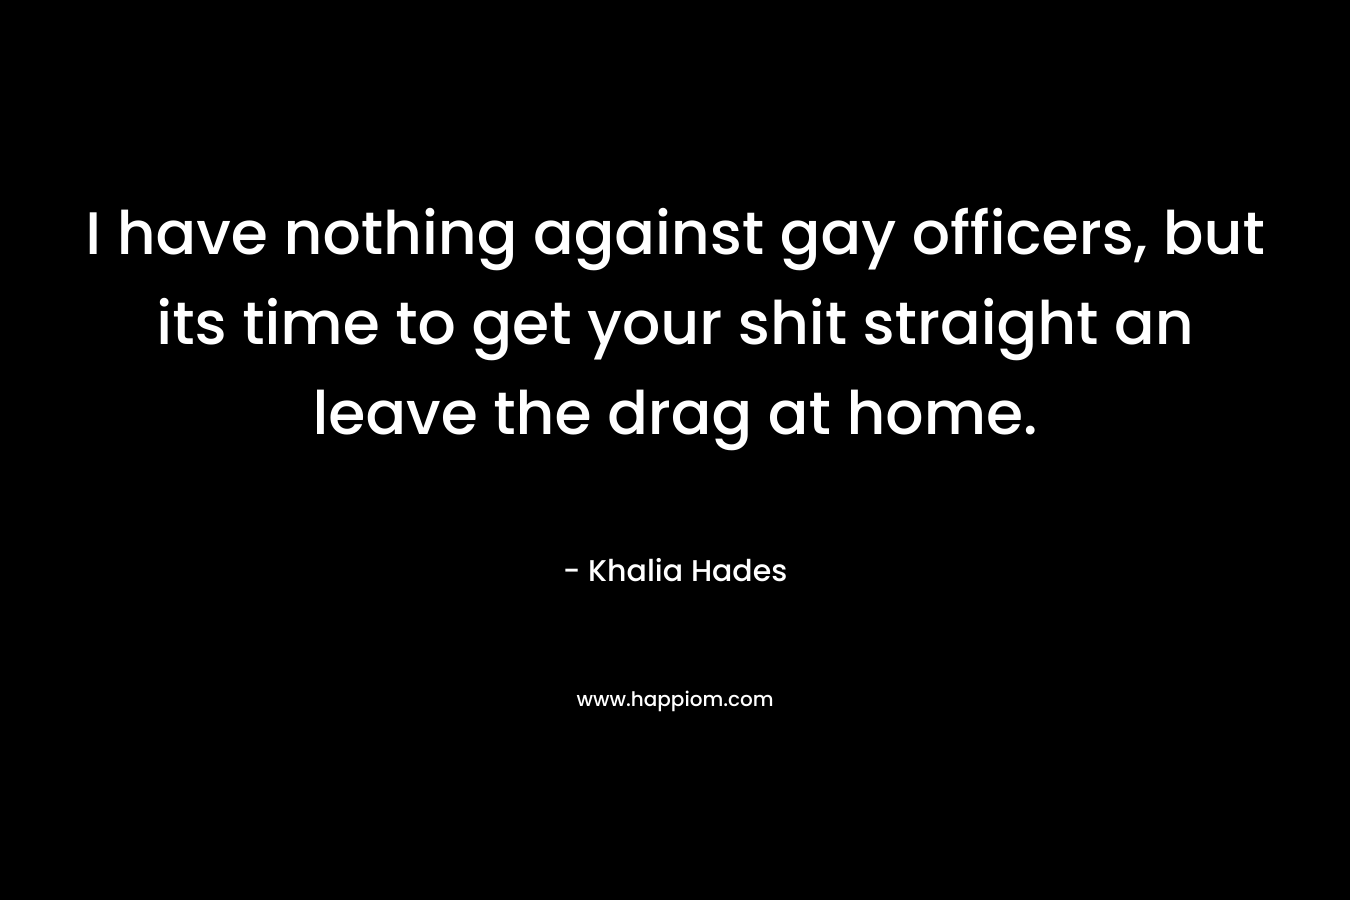 I have nothing against gay officers, but its time to get your shit straight an leave the drag at home.